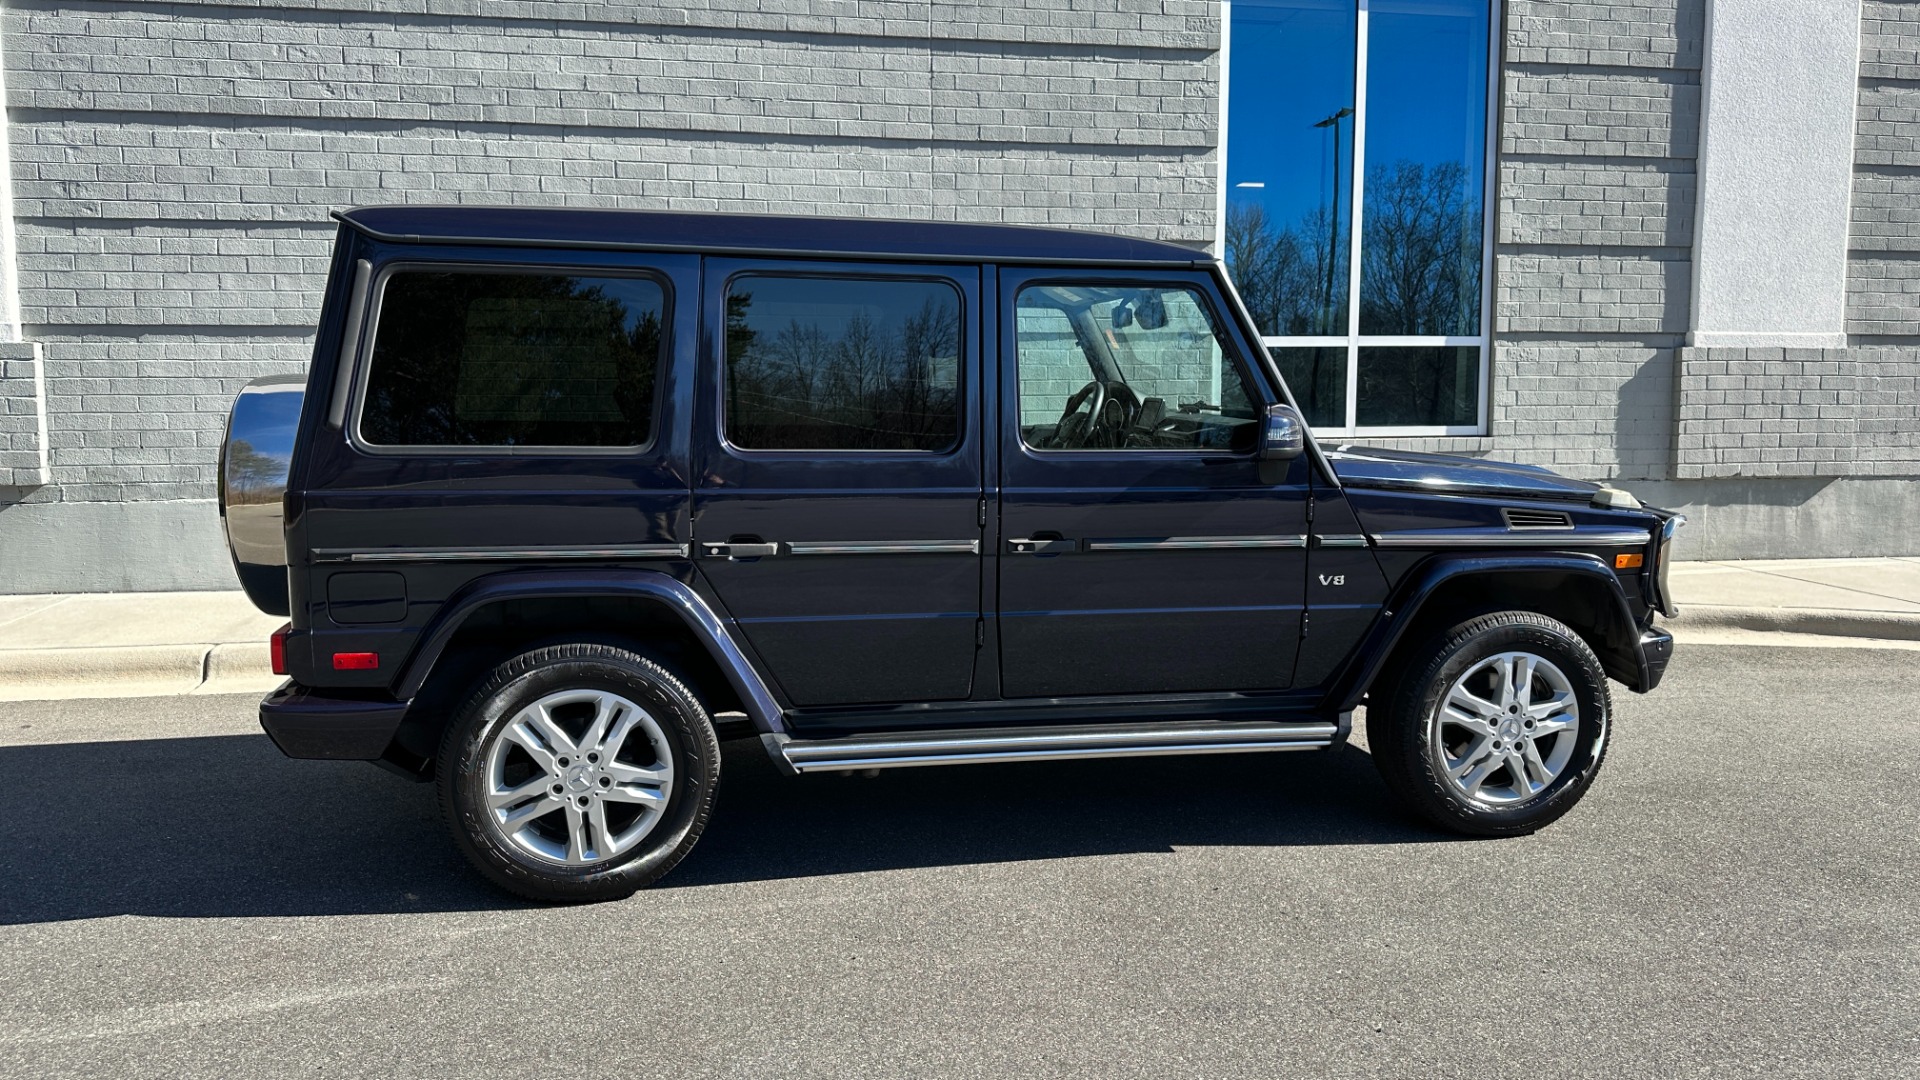 Used 2015 Mercedes-Benz G-Class G550 / DESIGNO NAPPA LEATHER / DESIGNO HEADLINER / HEATED STEERING / NAV /  for sale Sold at Formula Imports in Charlotte NC 28227 3